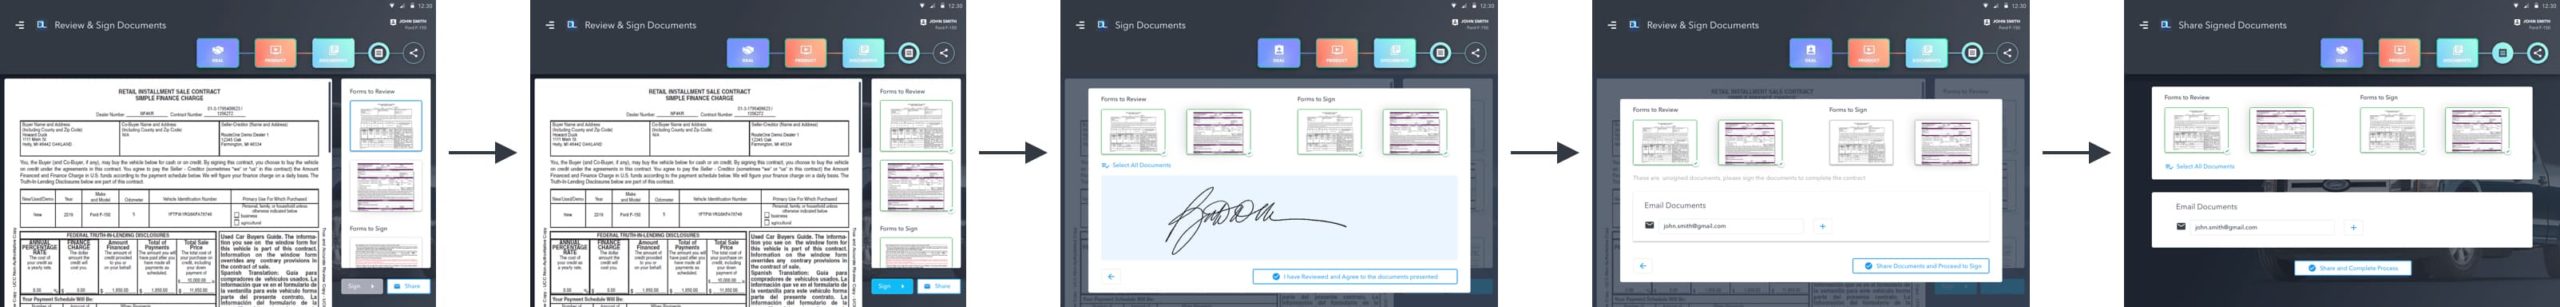 Documents screen flow from phase 1